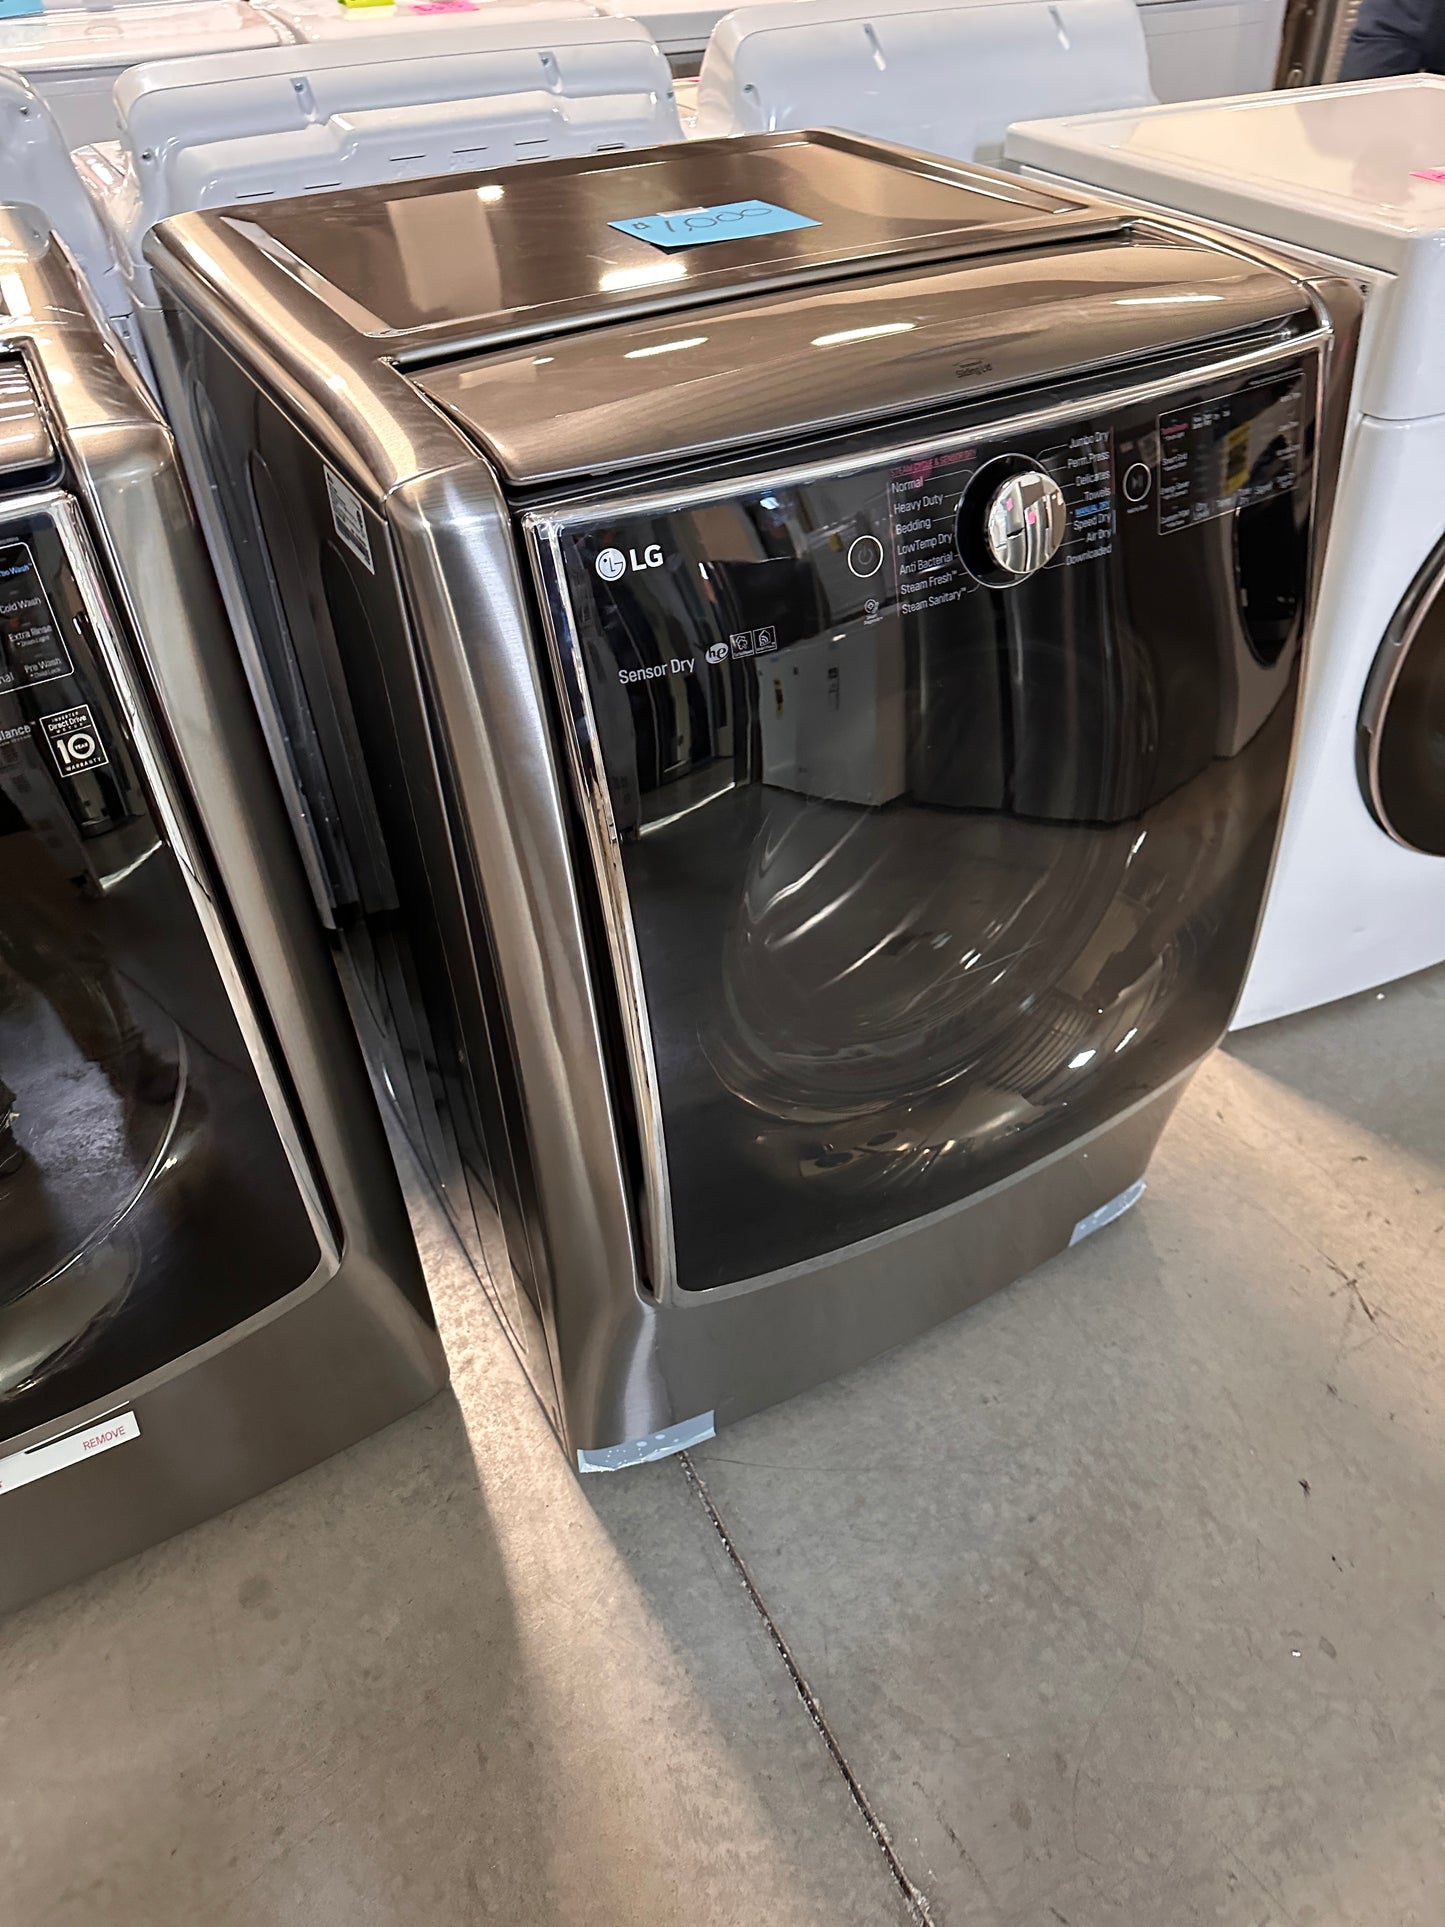 GREAT NEW LG FRONT LOAD WASHER - NEW IN BOX - WAS12774